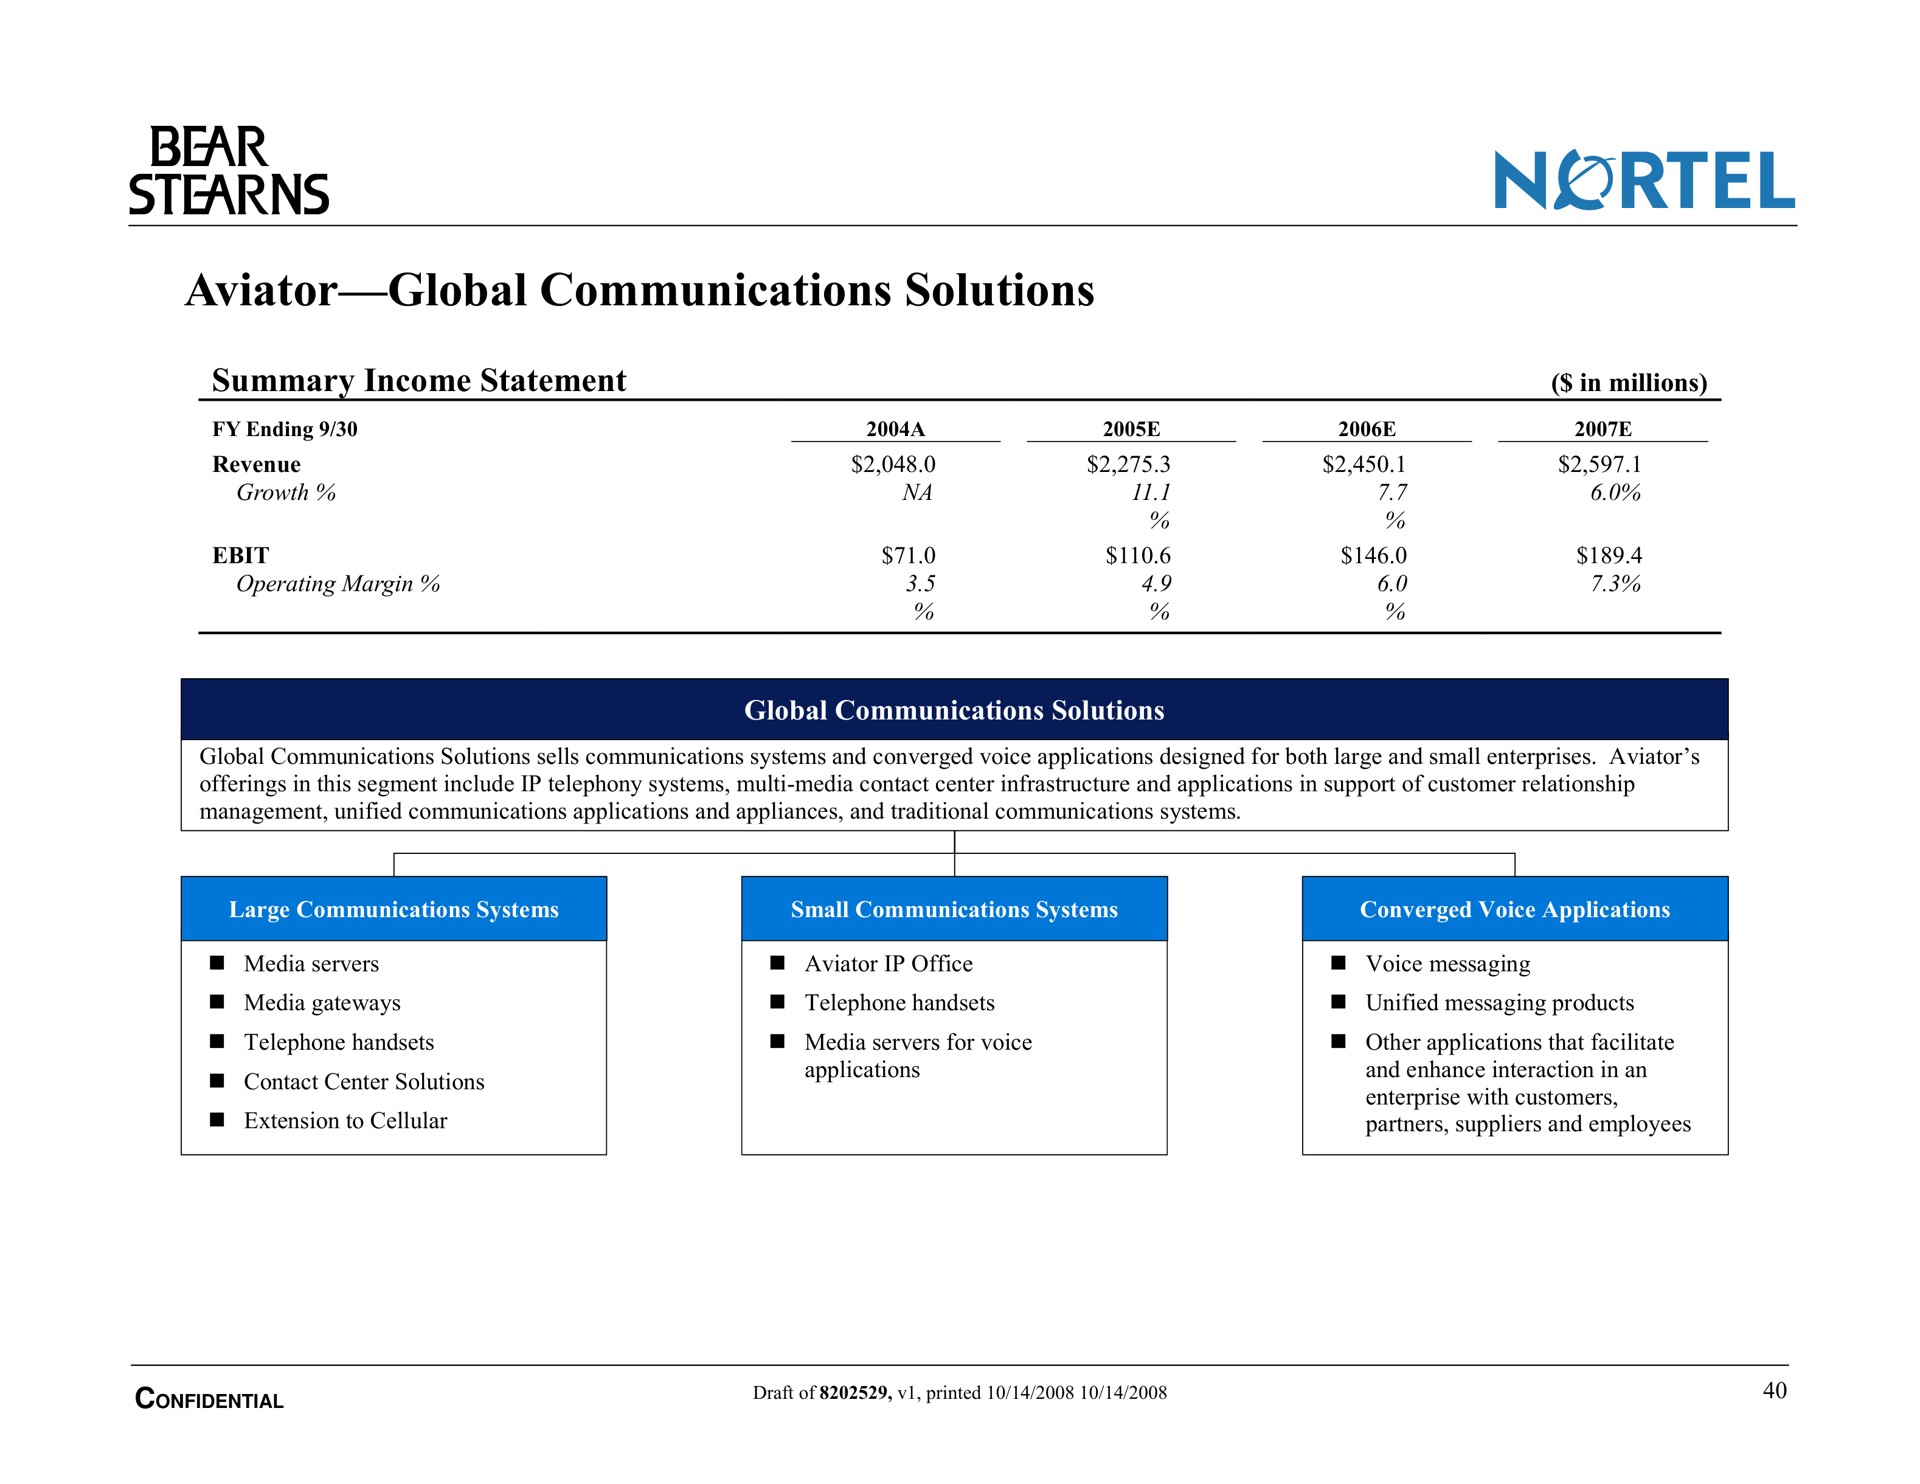 aviator global communications solutions summary income statement | Bear Stearns